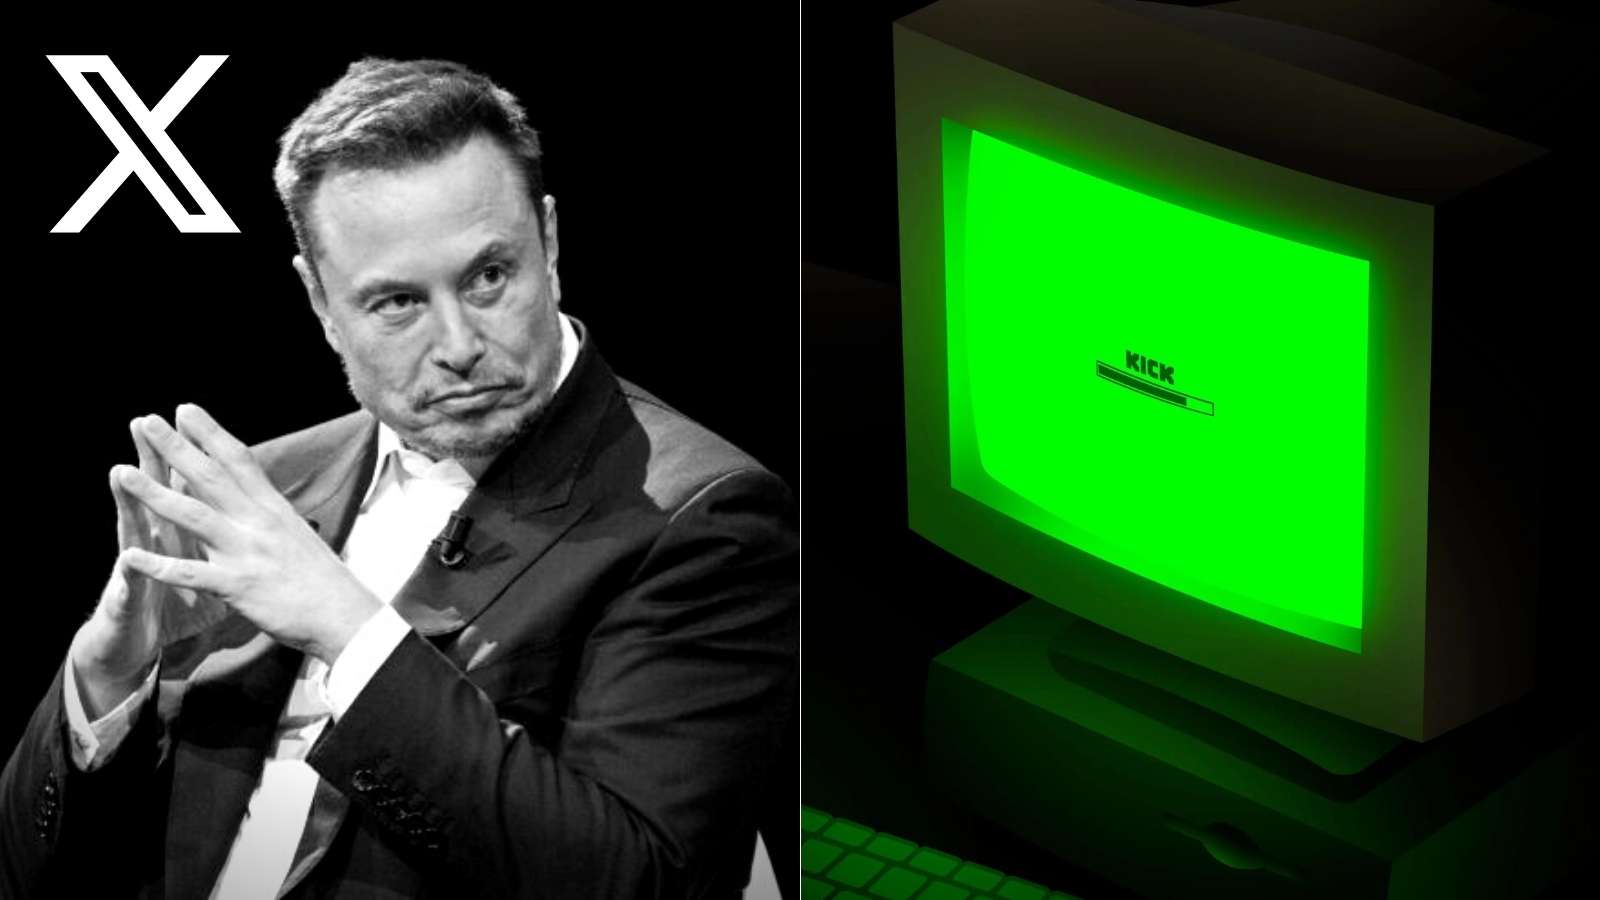 Elon Musk with X logo and computer with Kick logo